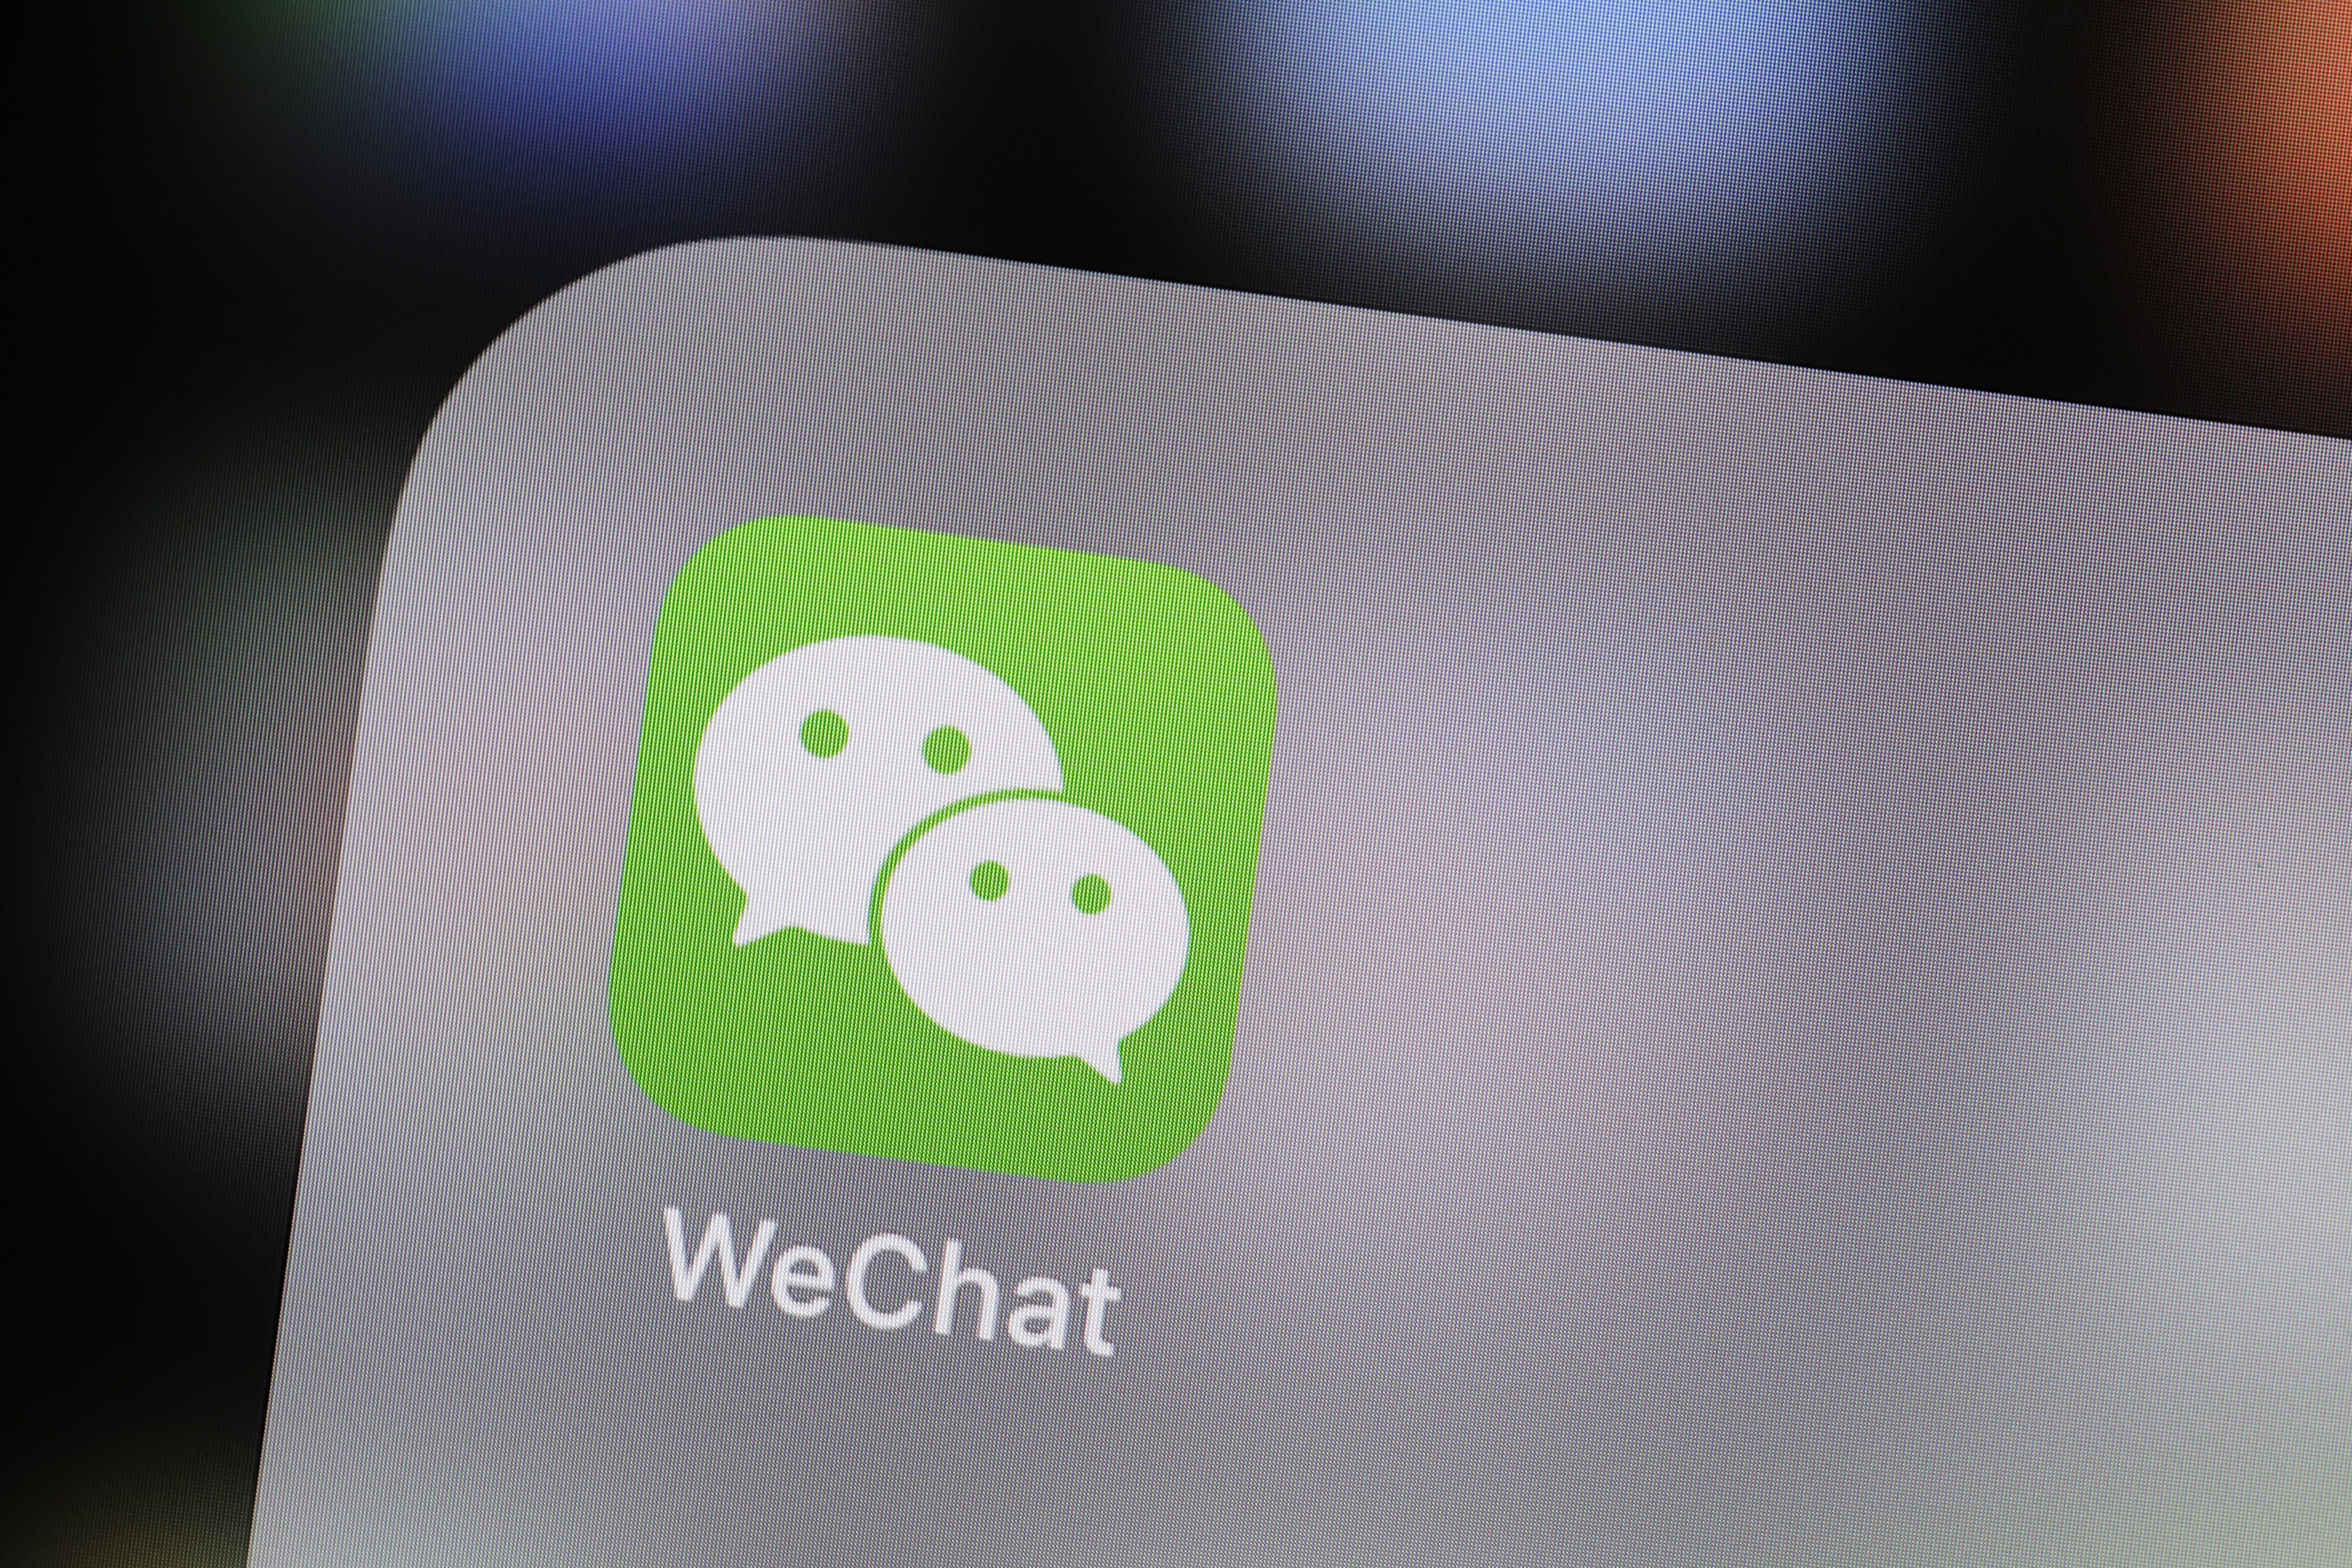 Representatives of WeChat told an Australian inquiry into foreign interference that Beijing did not have access to its platform, and it never was asked to spy on its users. Photo: Bloomberg